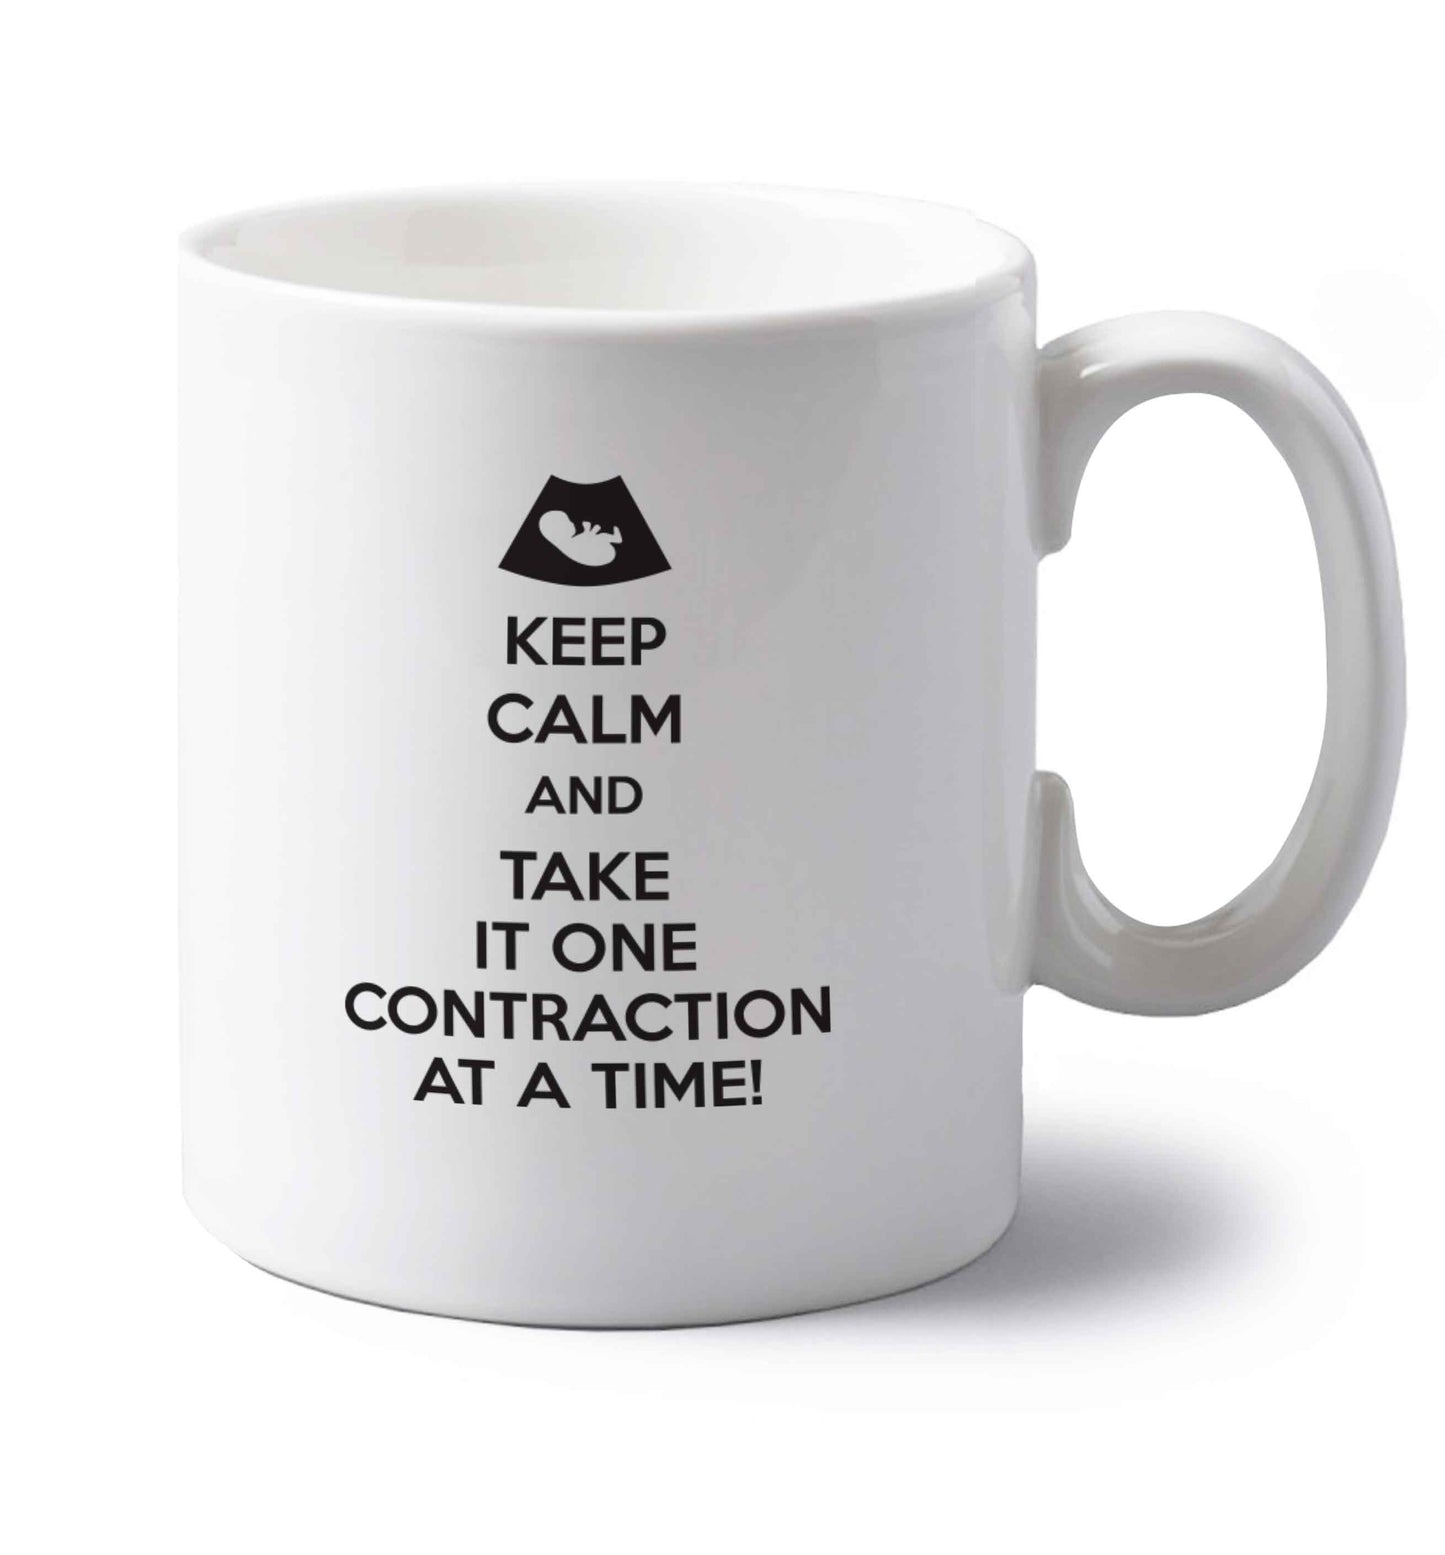 Keep calm and take it one contraction at a time left handed white ceramic mug 